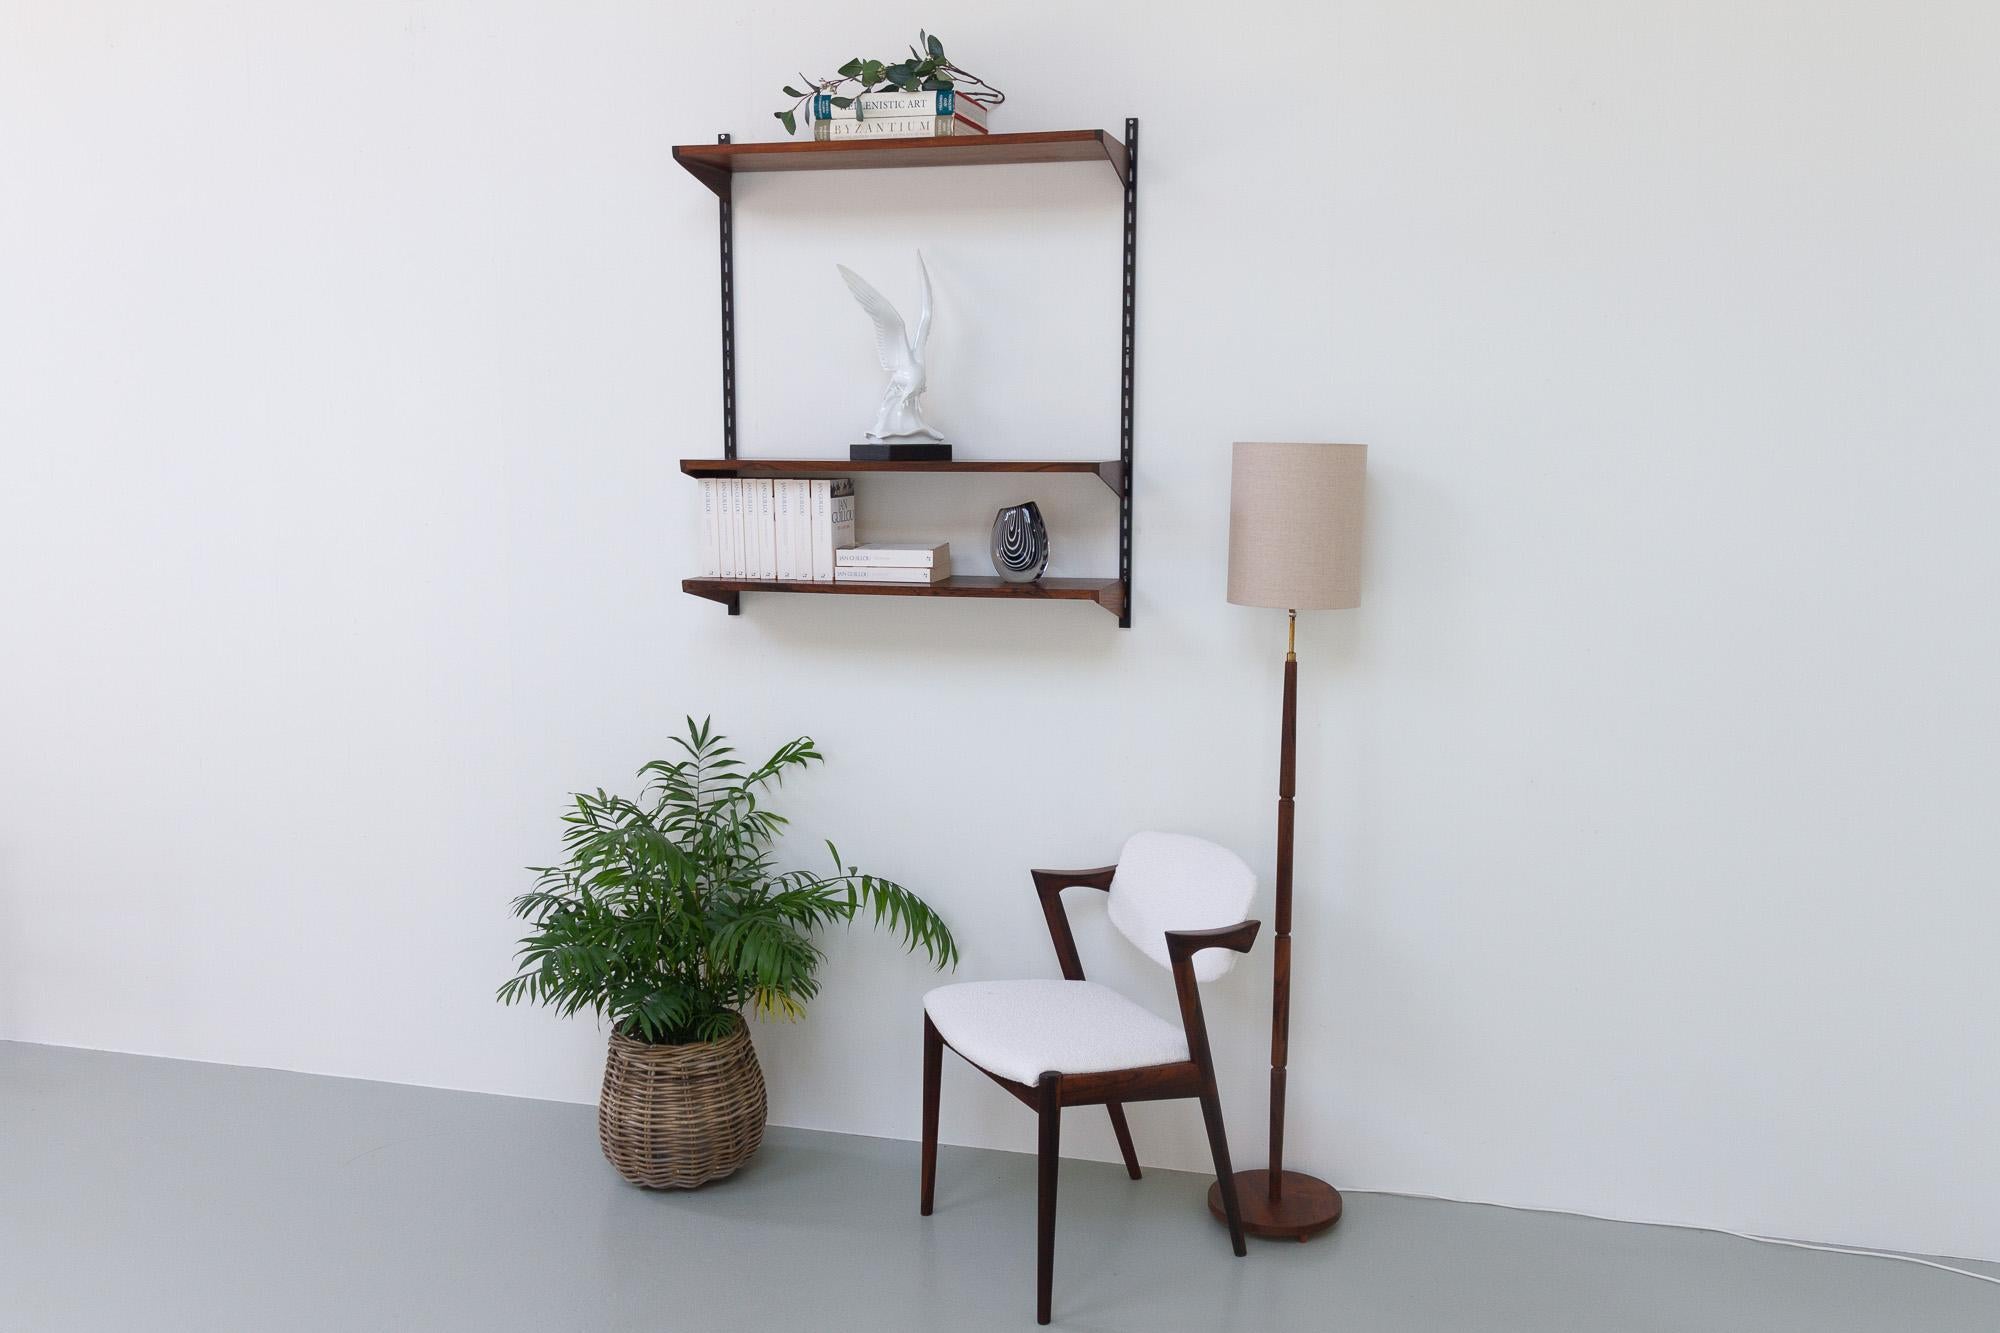 Vintage Danish Rosewood Wall Unit by Kai Kristiansen for FM, 1960s For Sale 2